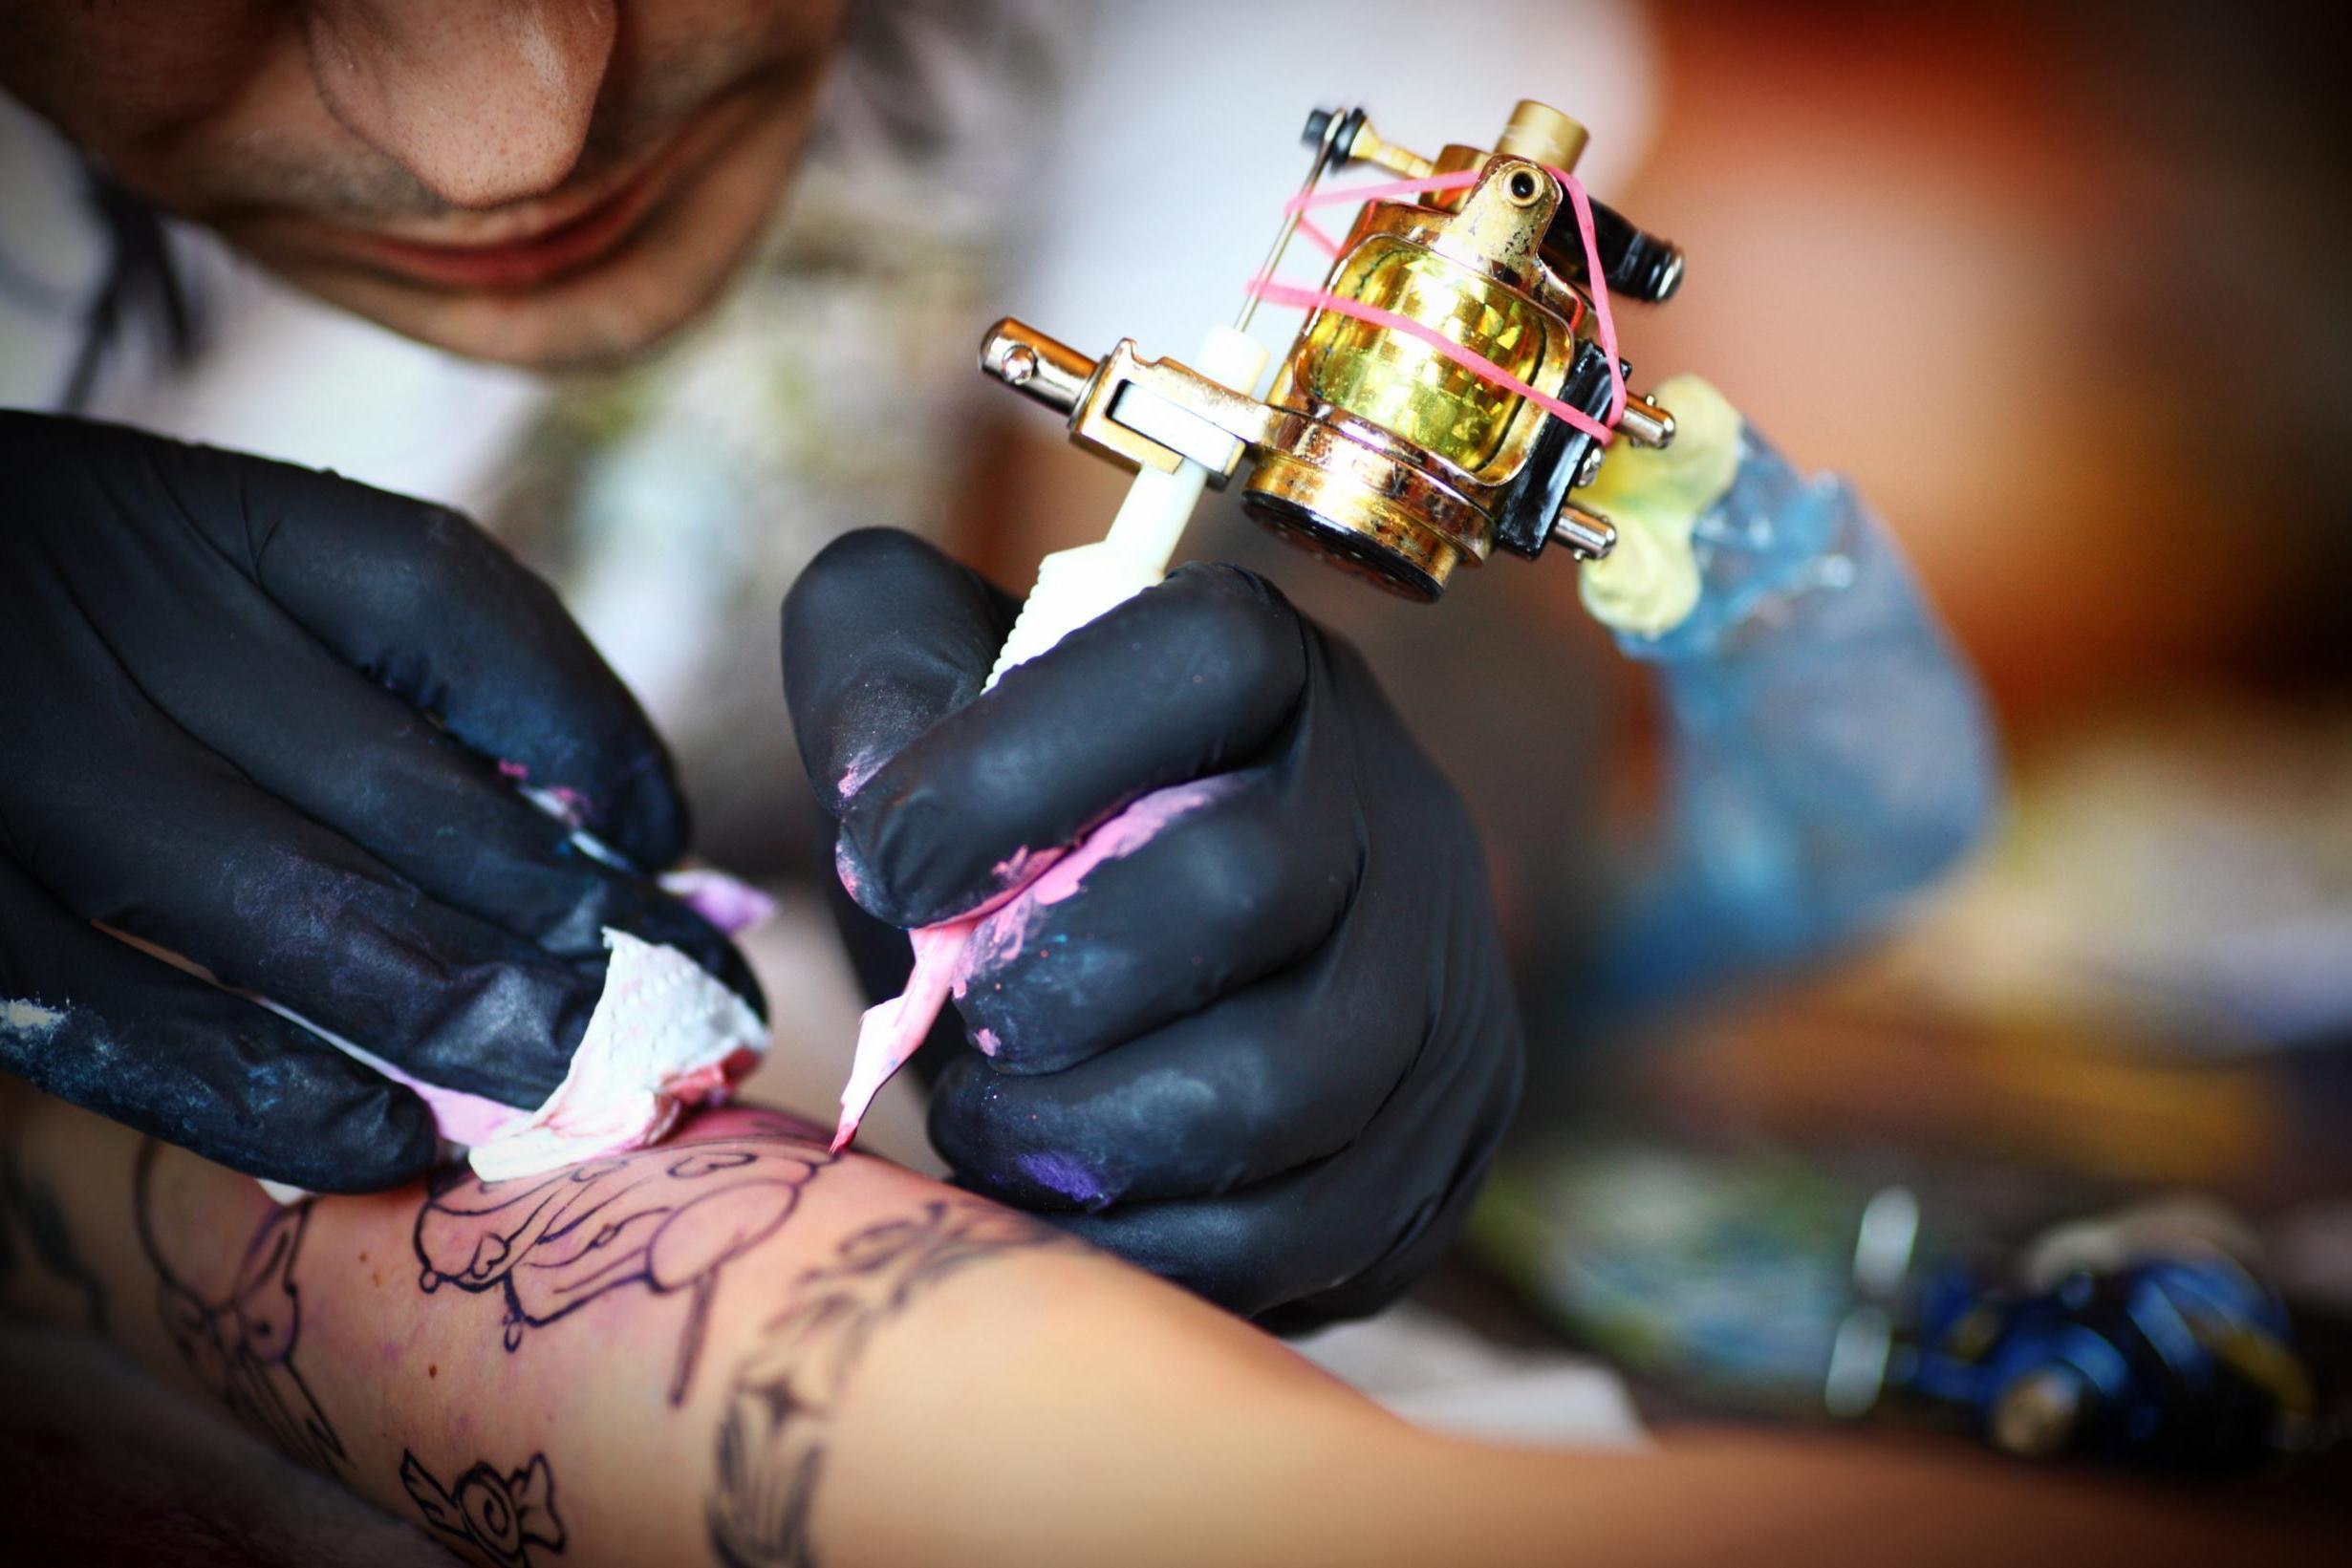 90% of US tattoo inks contain ingredients not listed on the label